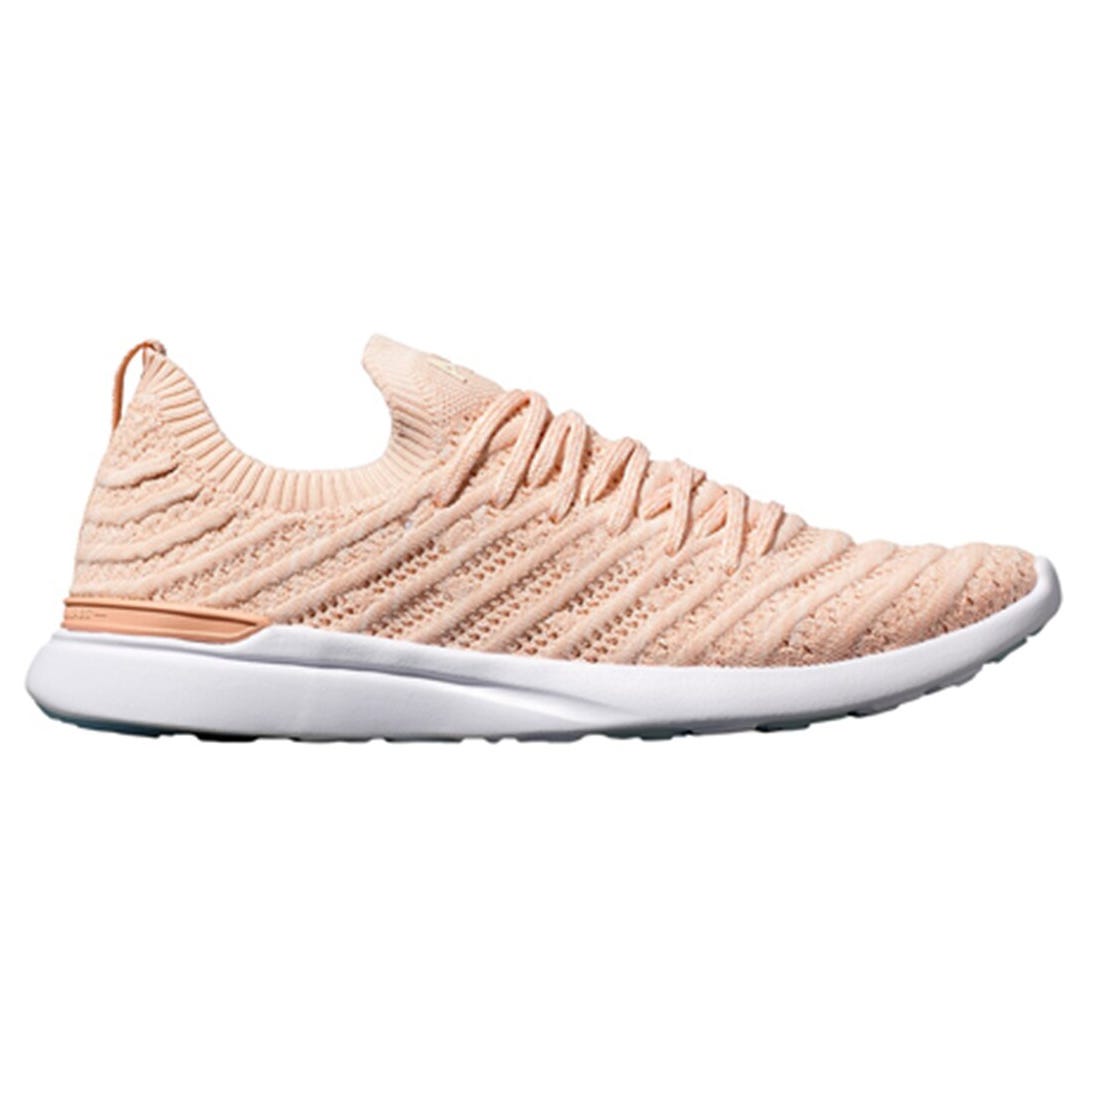 A single peach-colored knitted athletic shoe with a white sole.